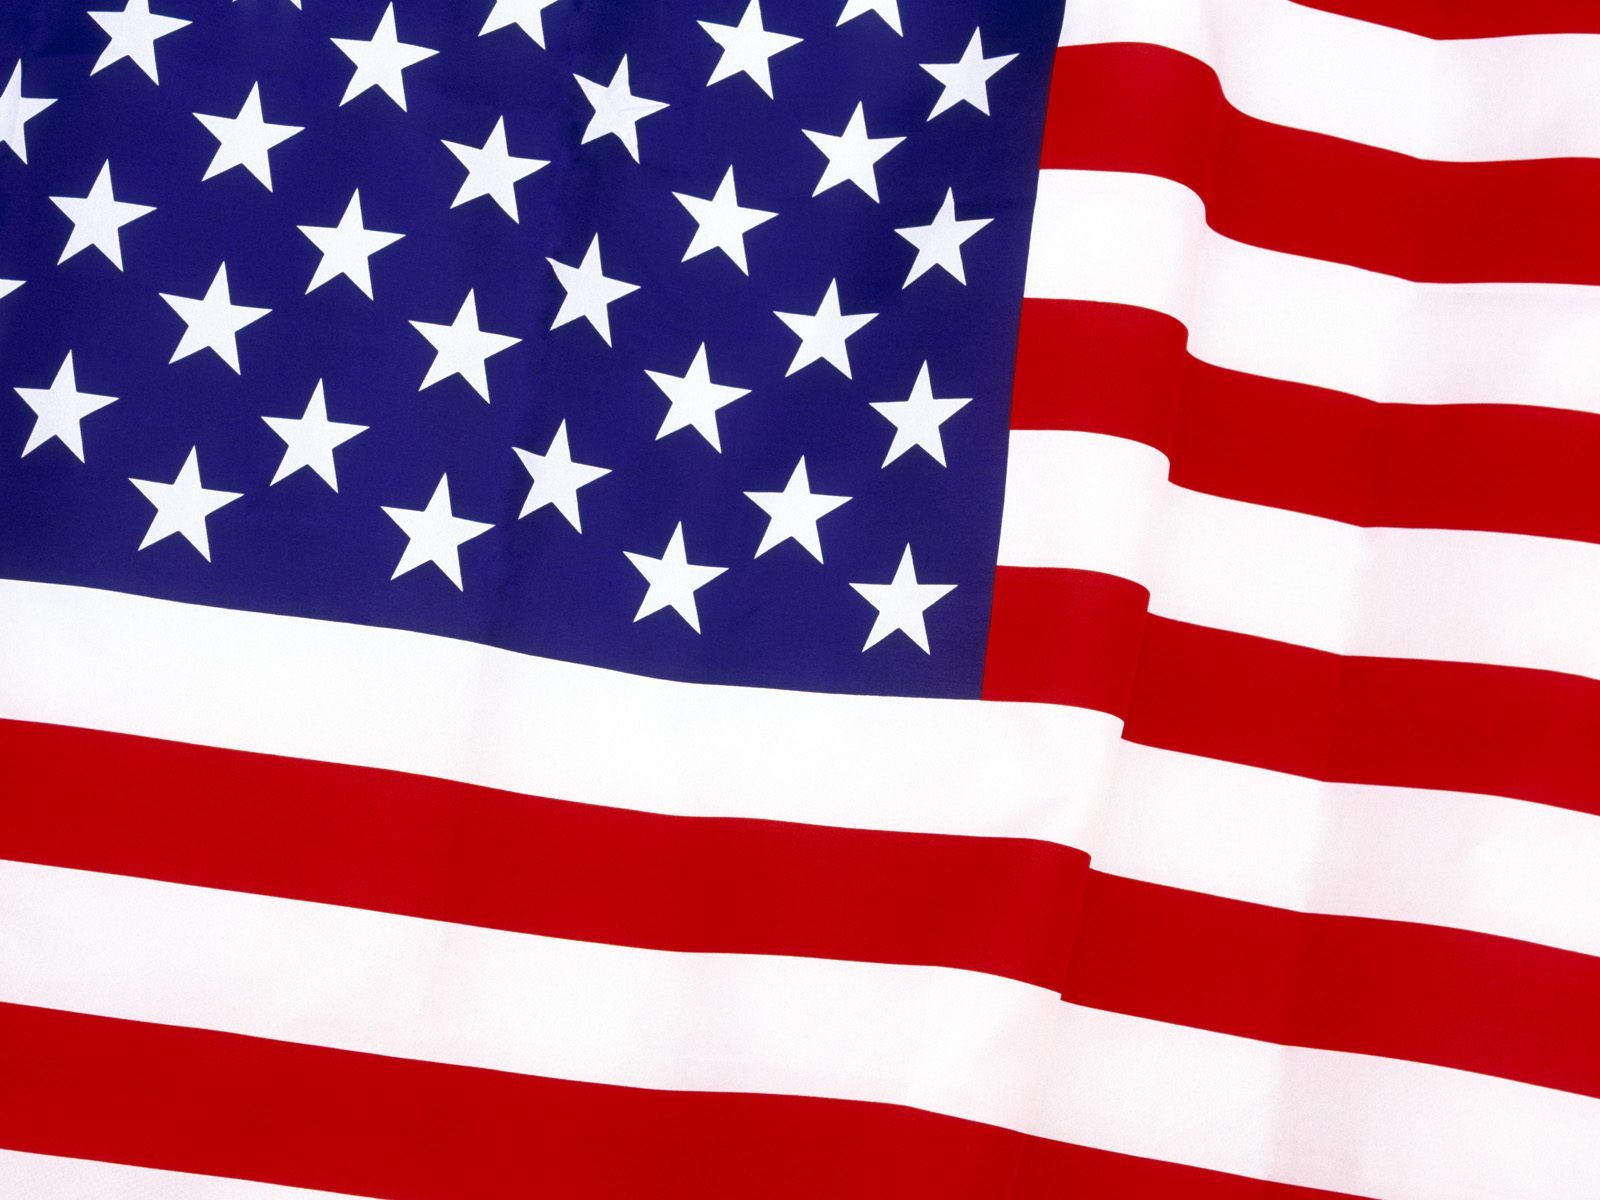 United States of America Flag Wallpapers HD Backgrounds